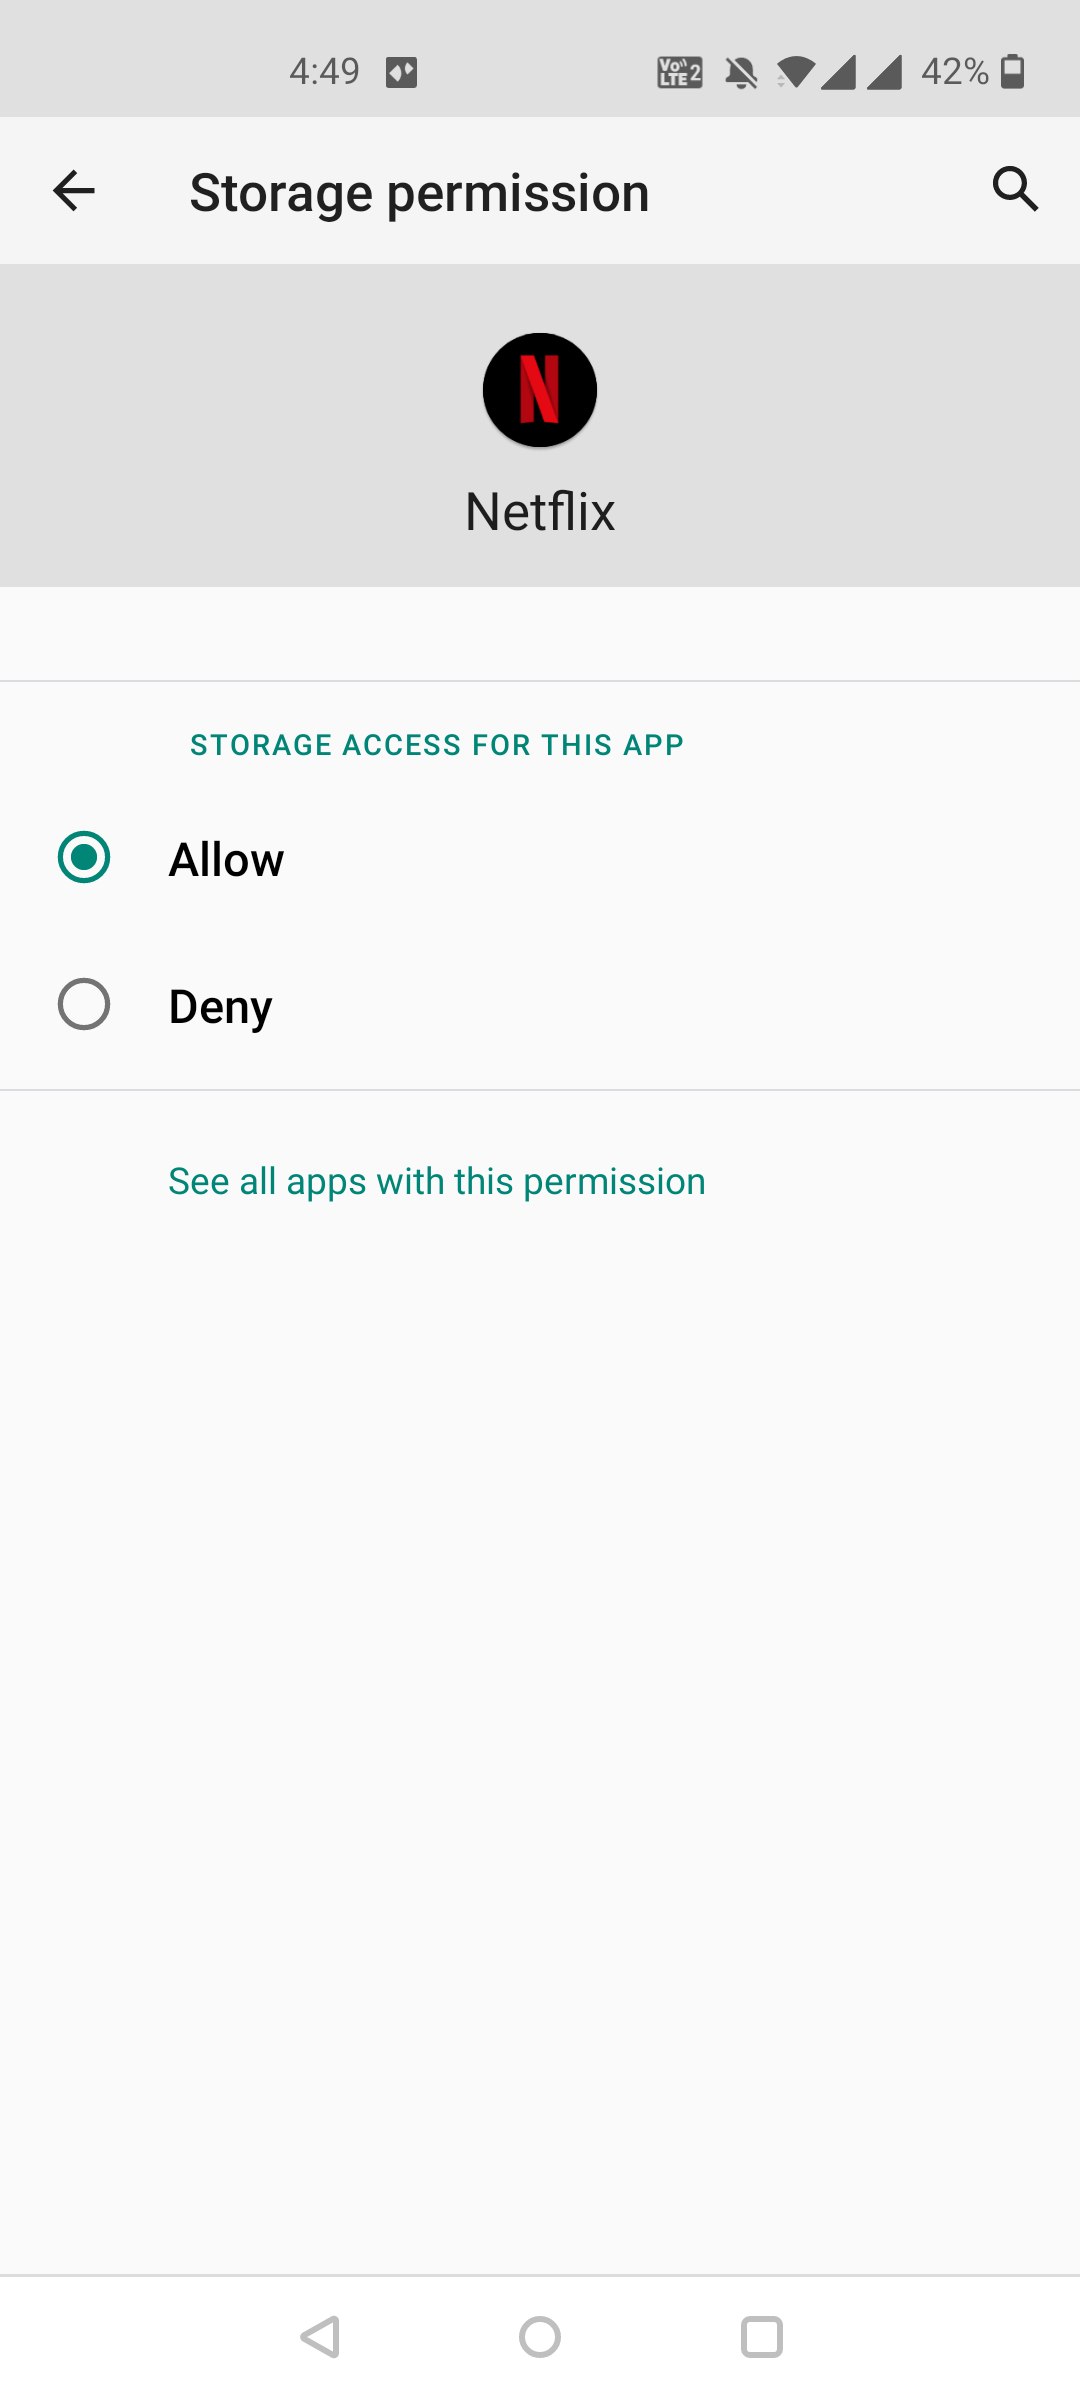 Give storage permissions to Netflix